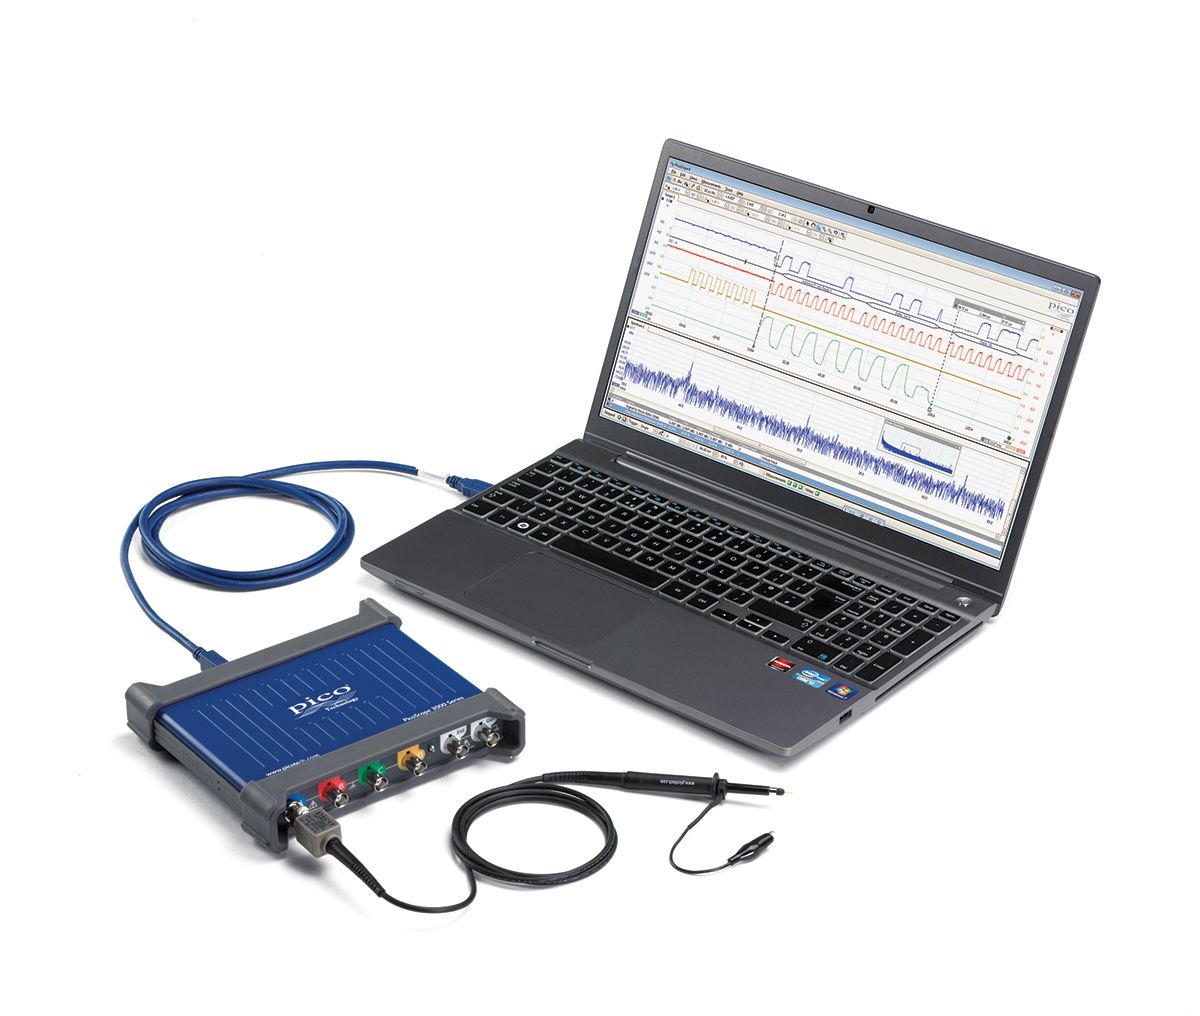 Pico Technology PicoScope 3406D MSO PC Based Oscilloscope, 200MHz, 4 Analogue Channels